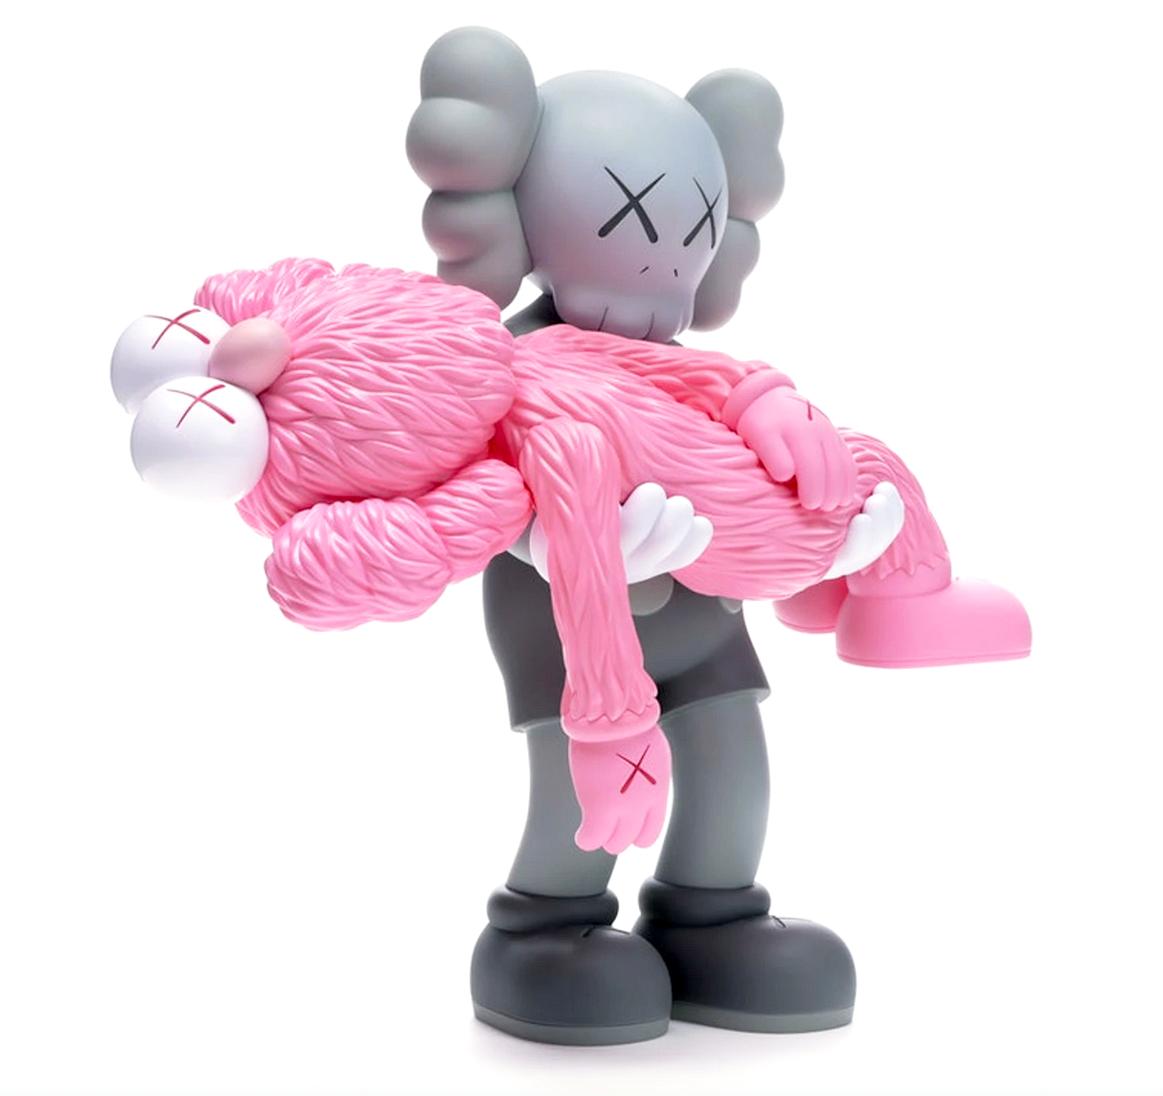 most expensive kaws figures